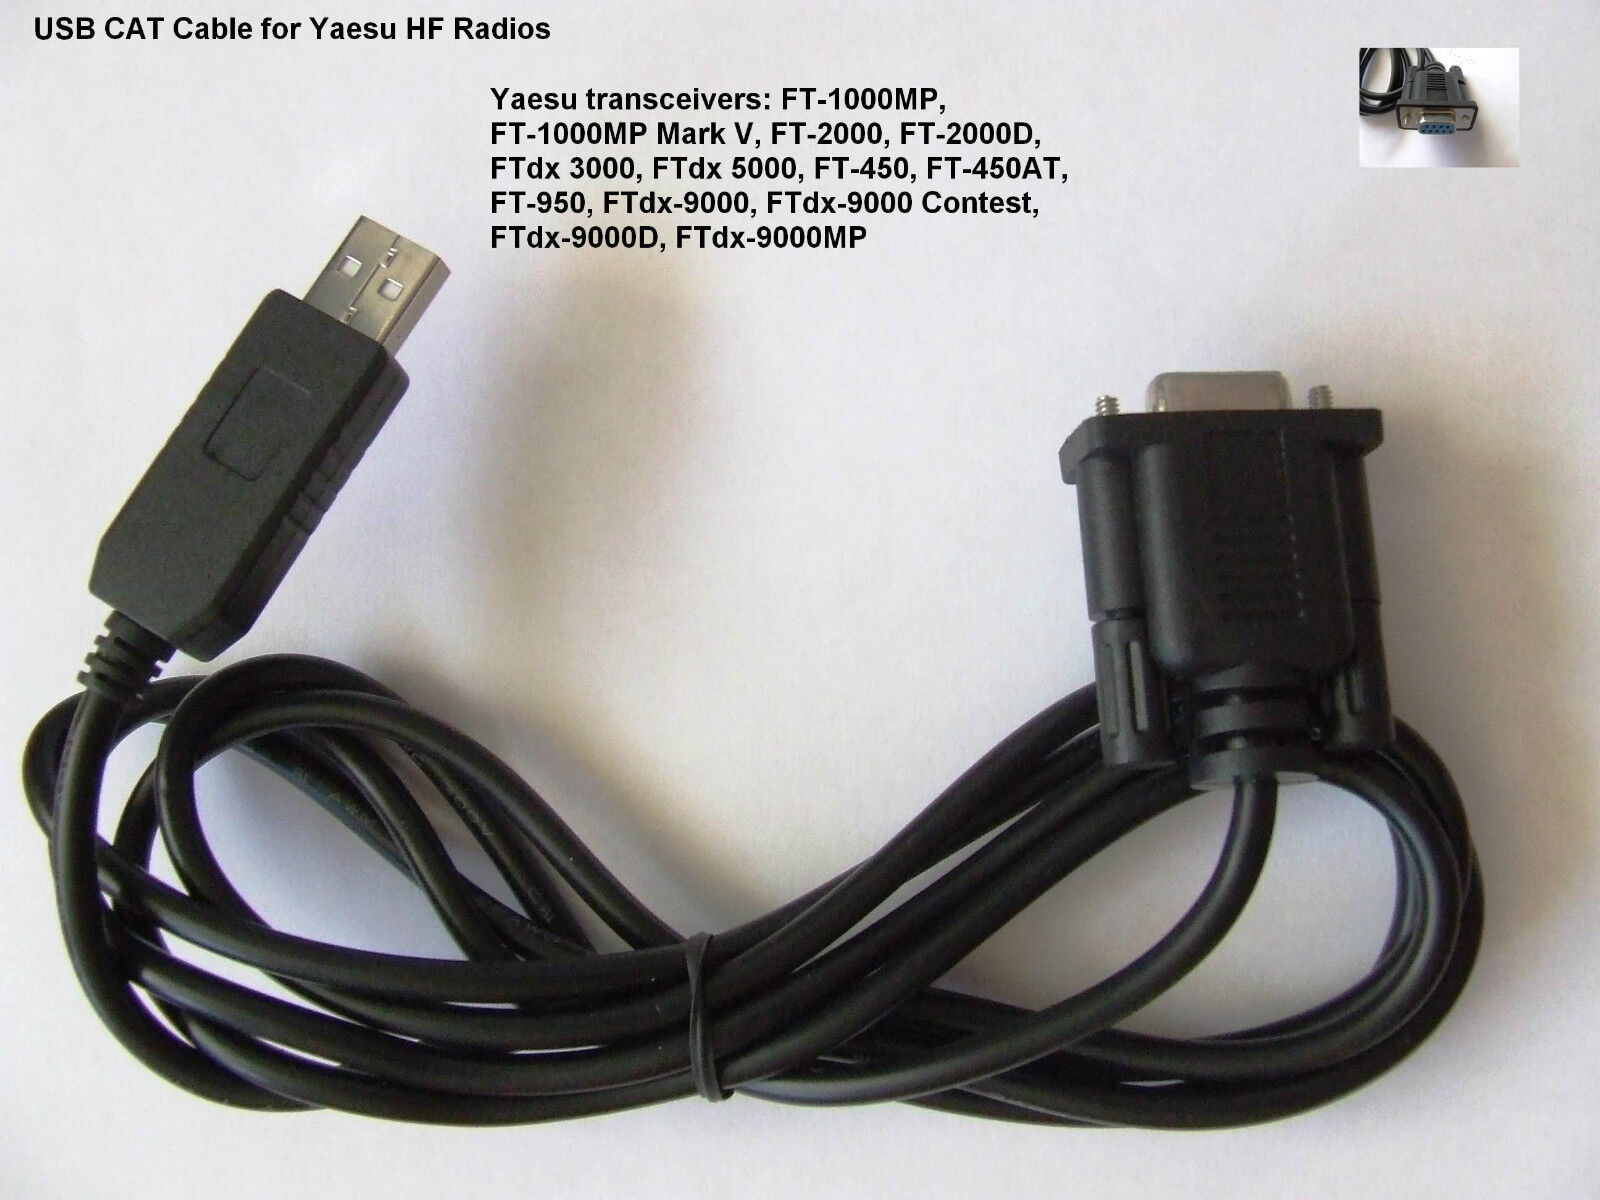 USB CAT Programming Cable for Yaesu FT-991 1.8m long